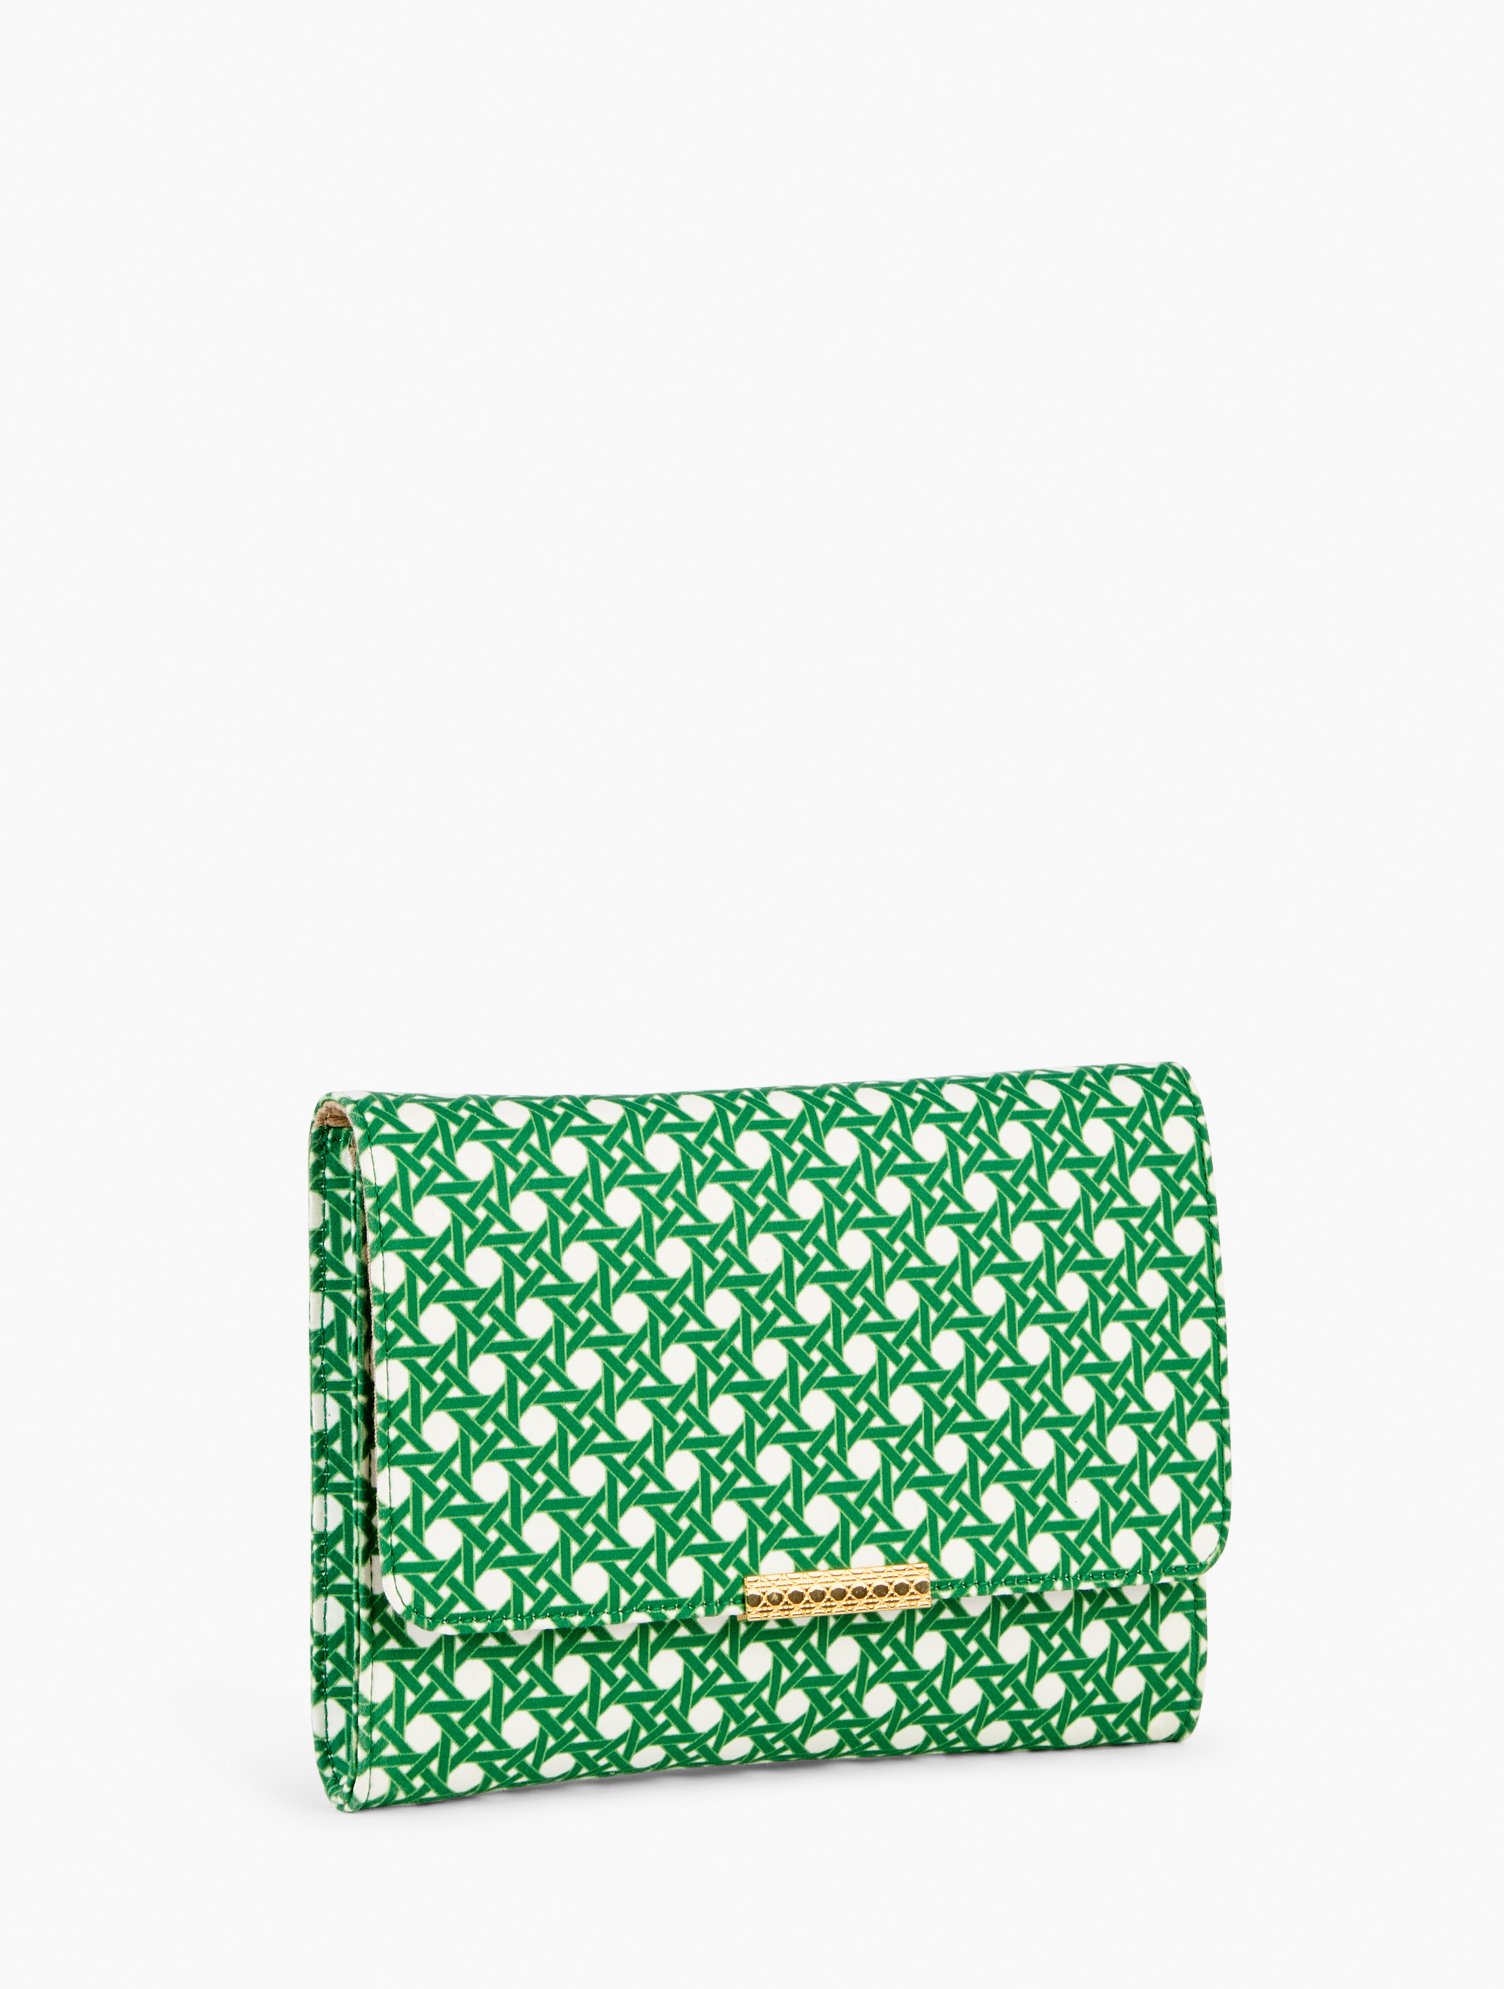 Talbots Intricate Dots Sateen Clutch - Ivory - 001  In Animal Print